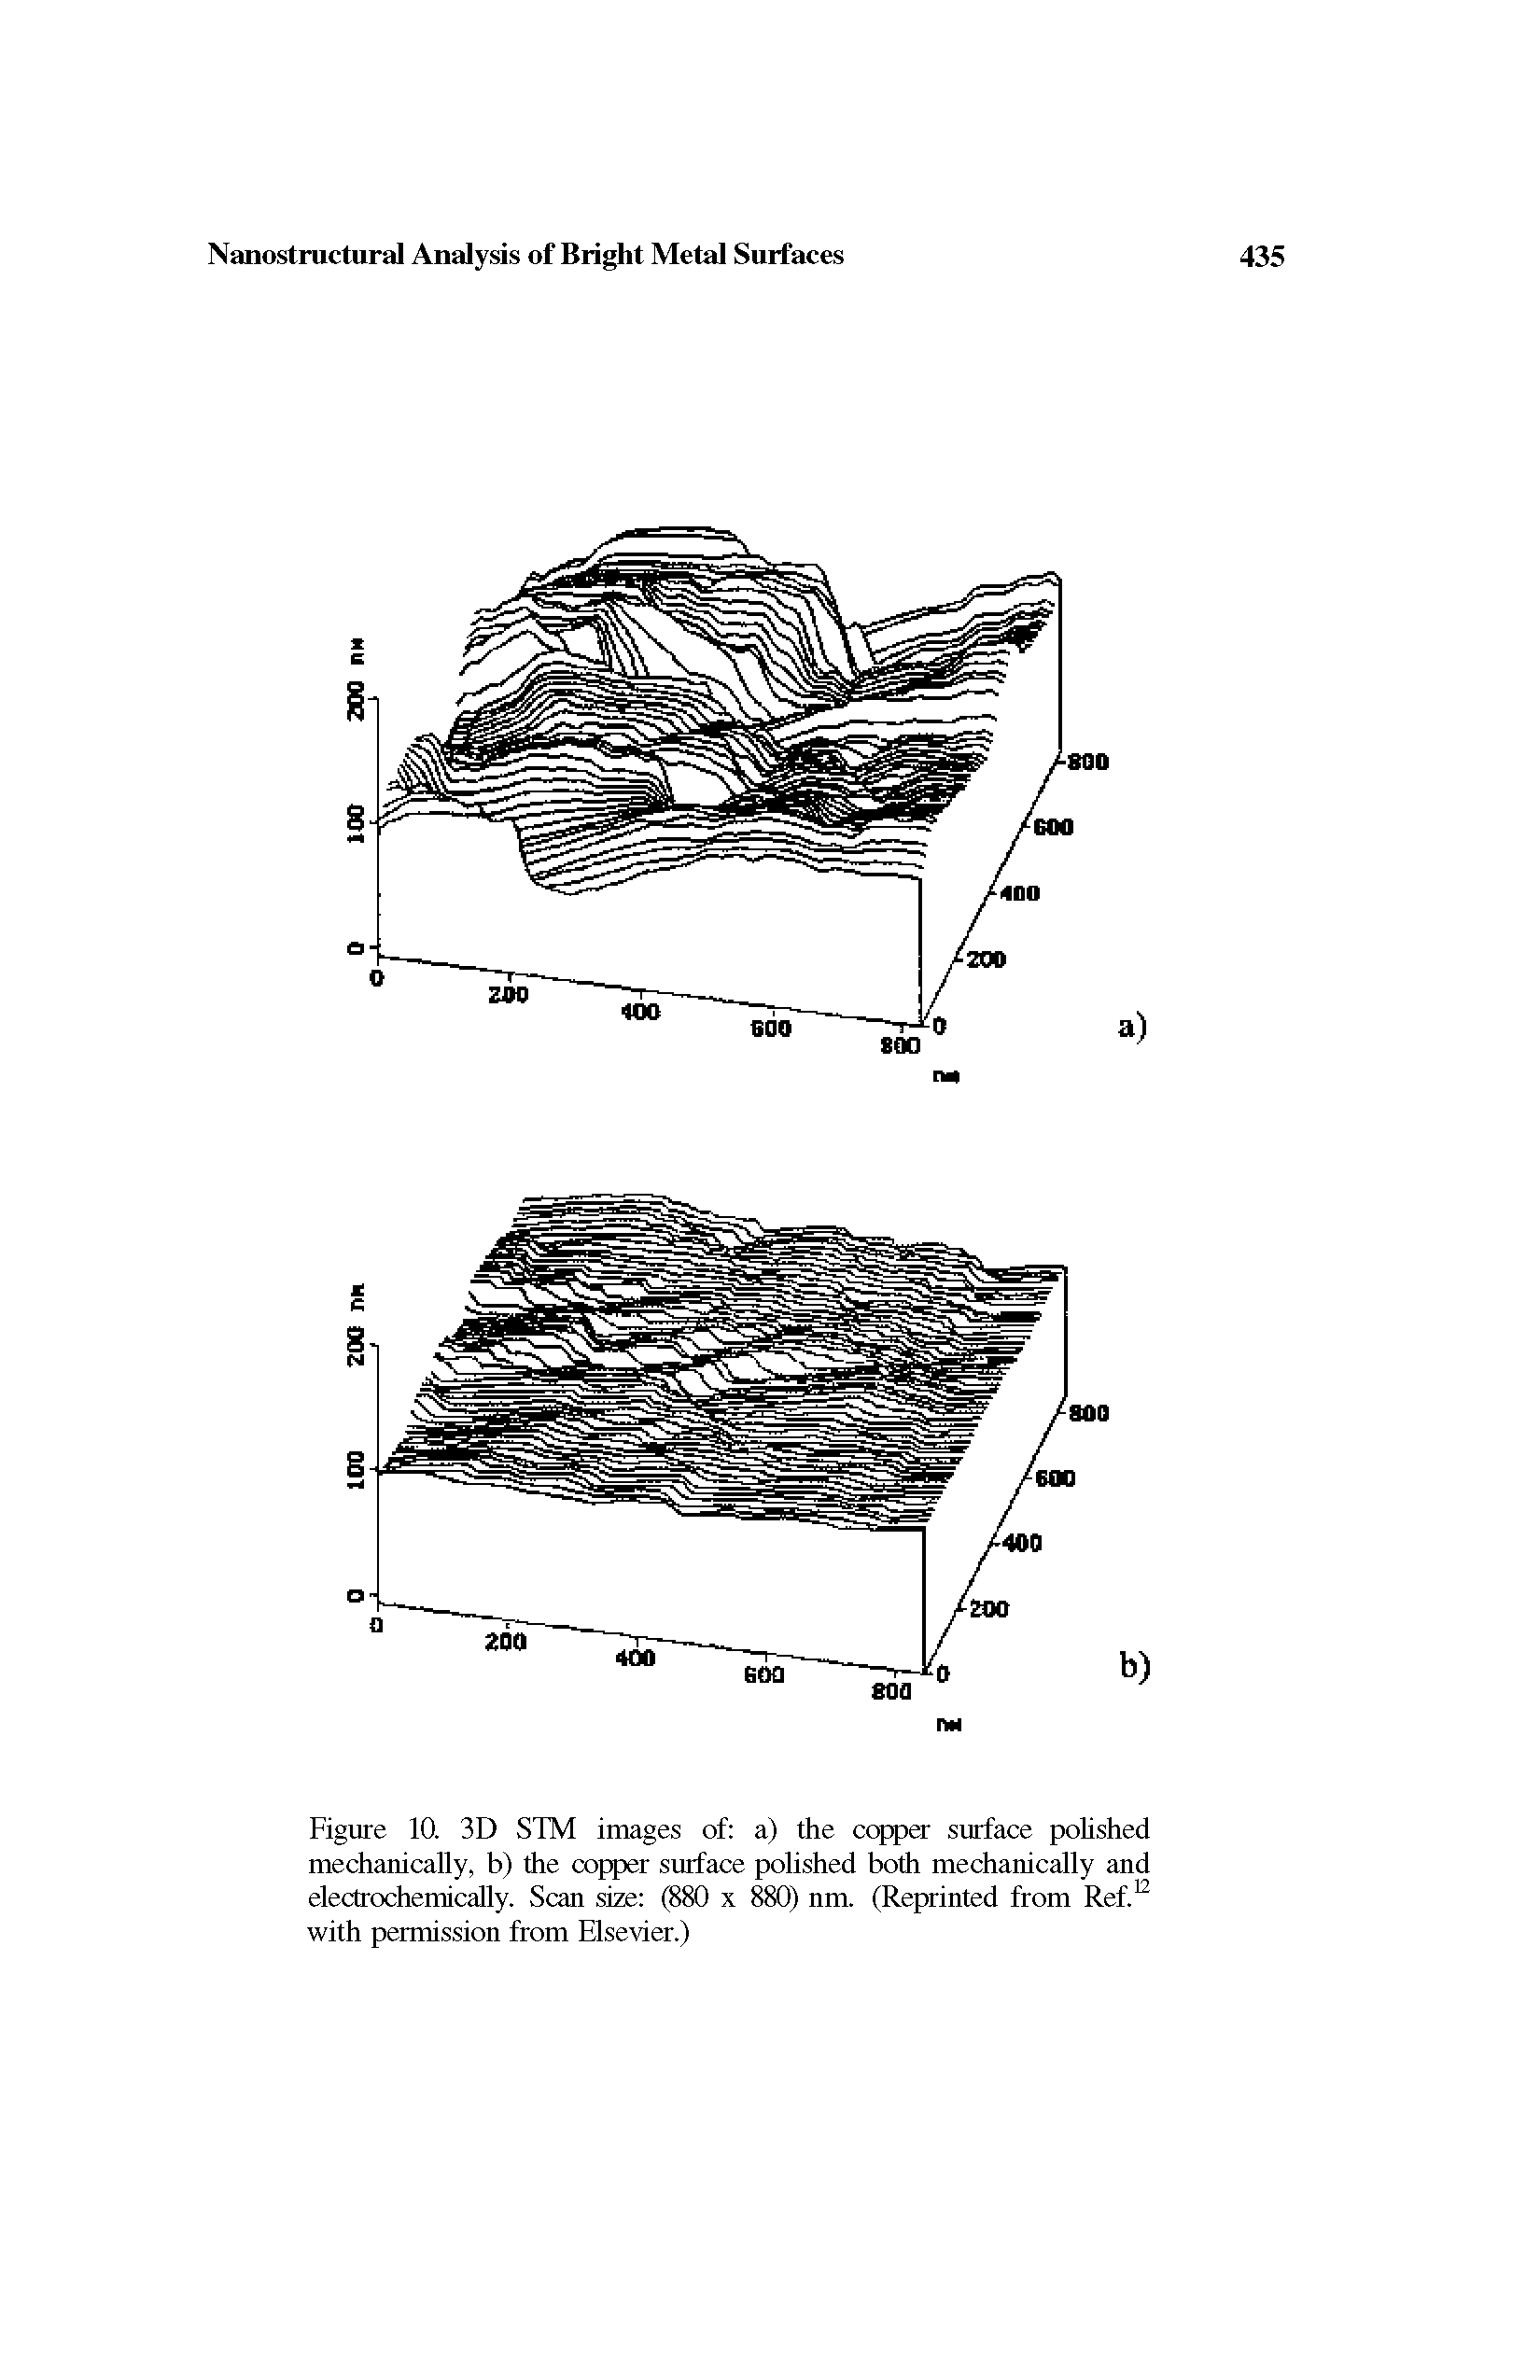 Figure 10. 3D STM images of a) the copper surface polished mechanically, b) the copper surface polished both mechanically and electrochemically. Scan size (880 x 880) nm. (Reprinted from Ref.12 with permission from Elsevier.)...